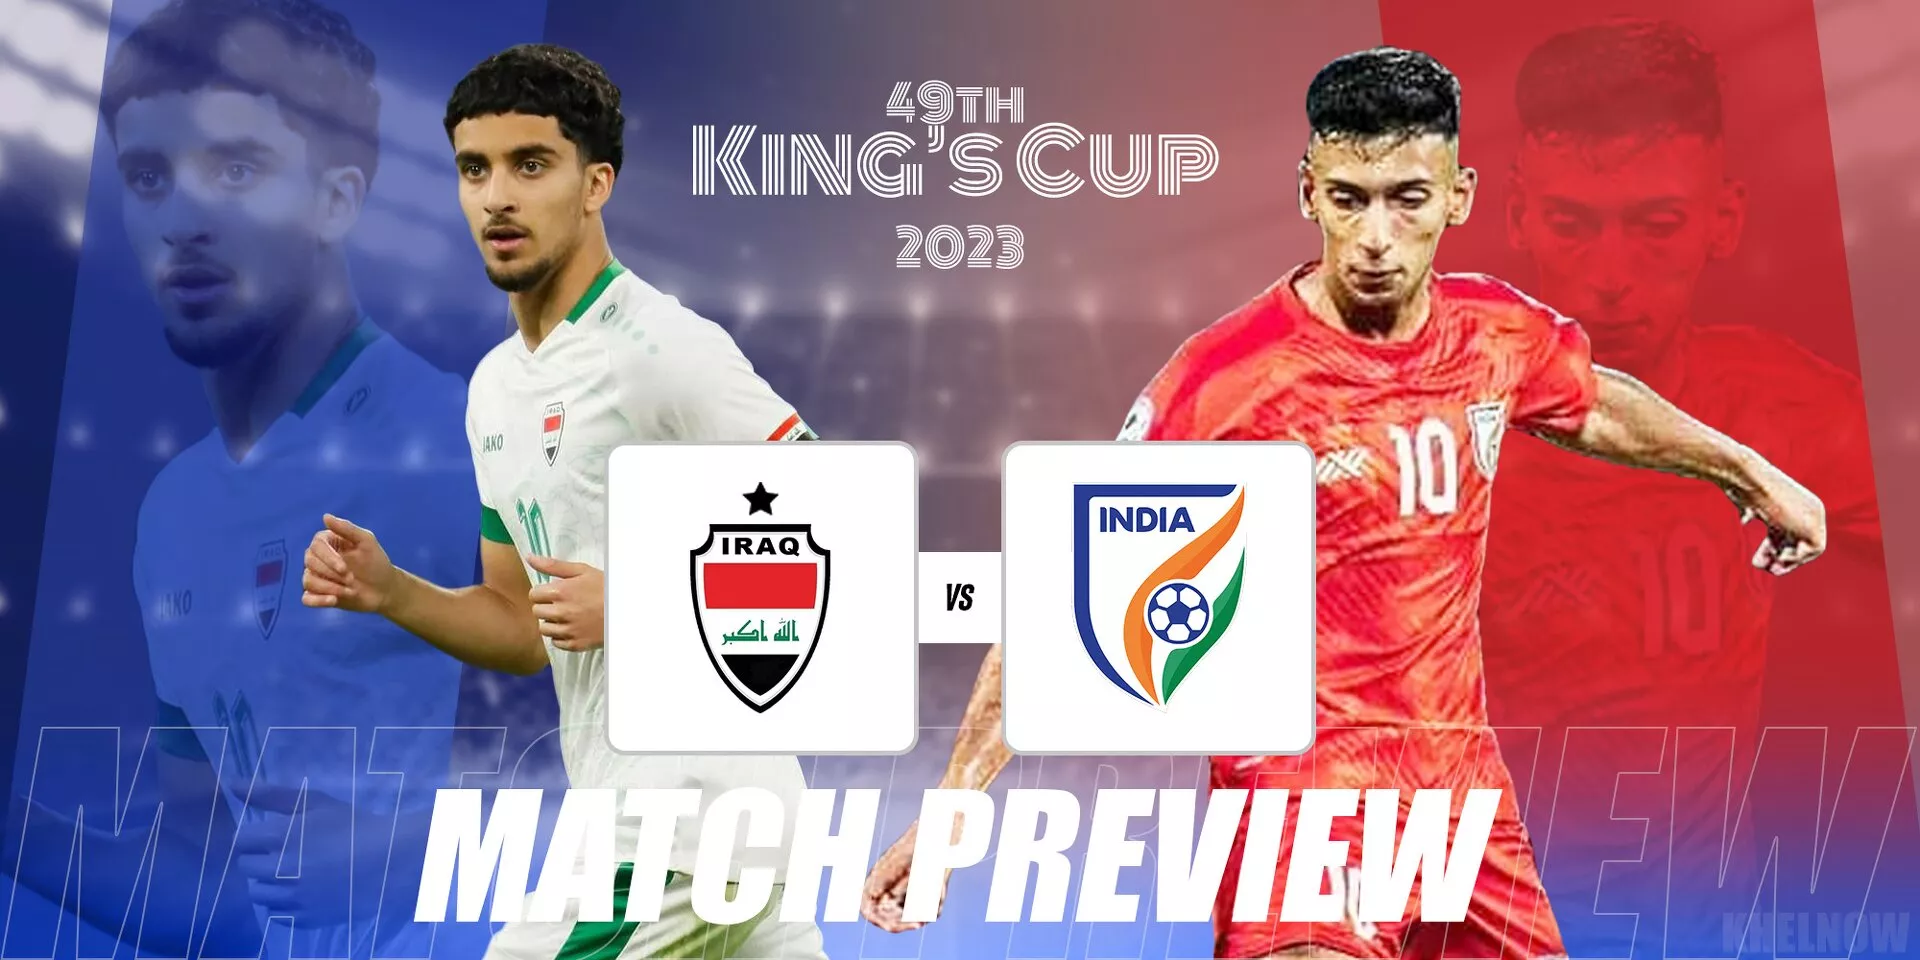 King’s Cup 2023: India take on formidable Iraq in semis clash